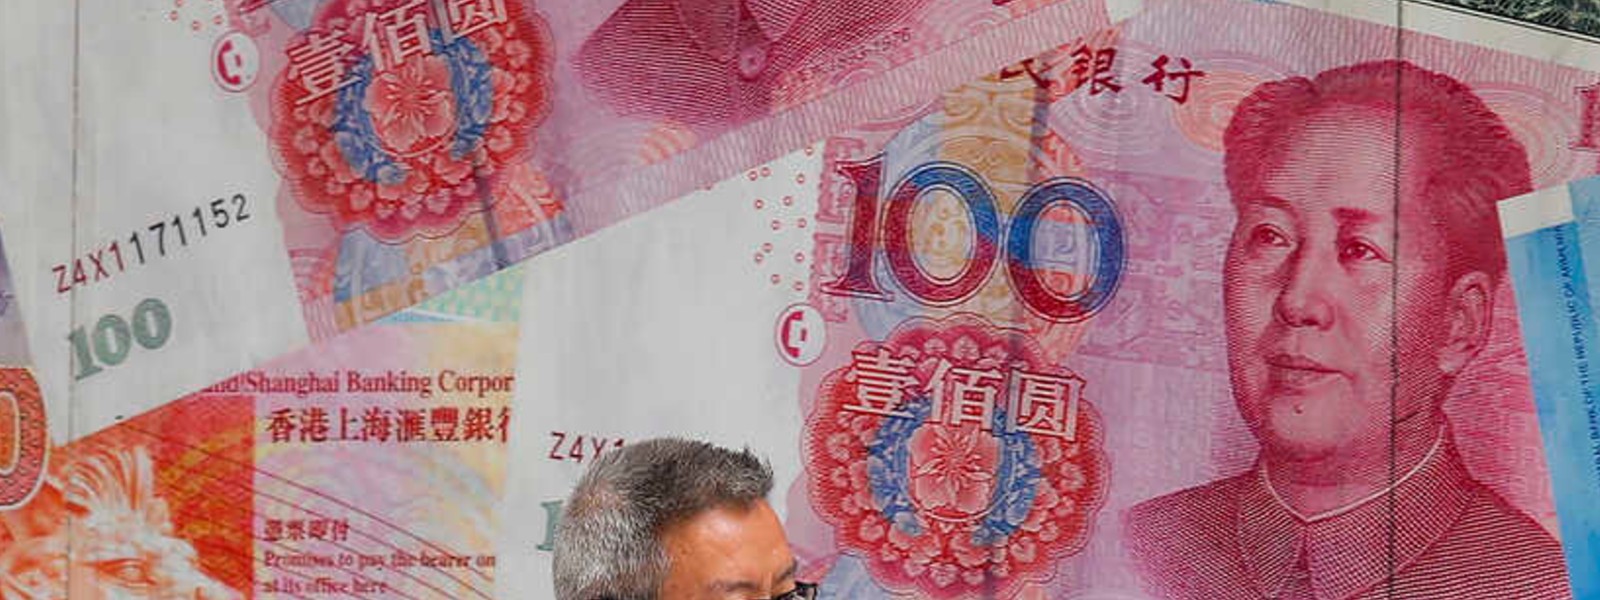 CHINA’S INITIATIVE TO REPLACE PAPER MONEY WITH DIGITAL CURRENCY